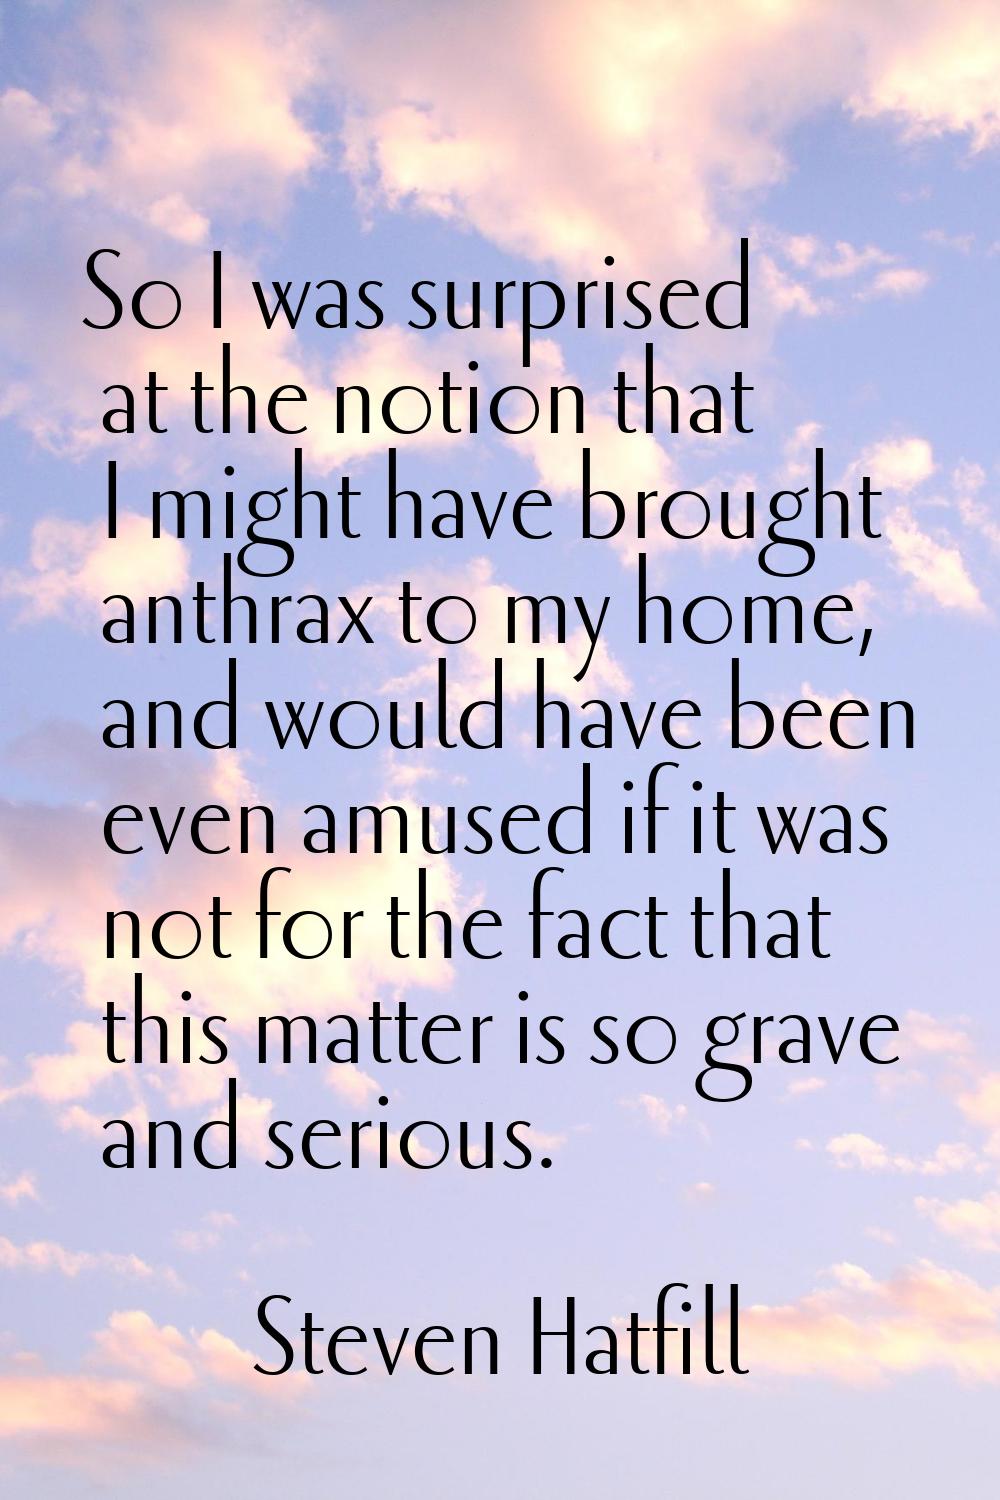 So I was surprised at the notion that I might have brought anthrax to my home, and would have been 